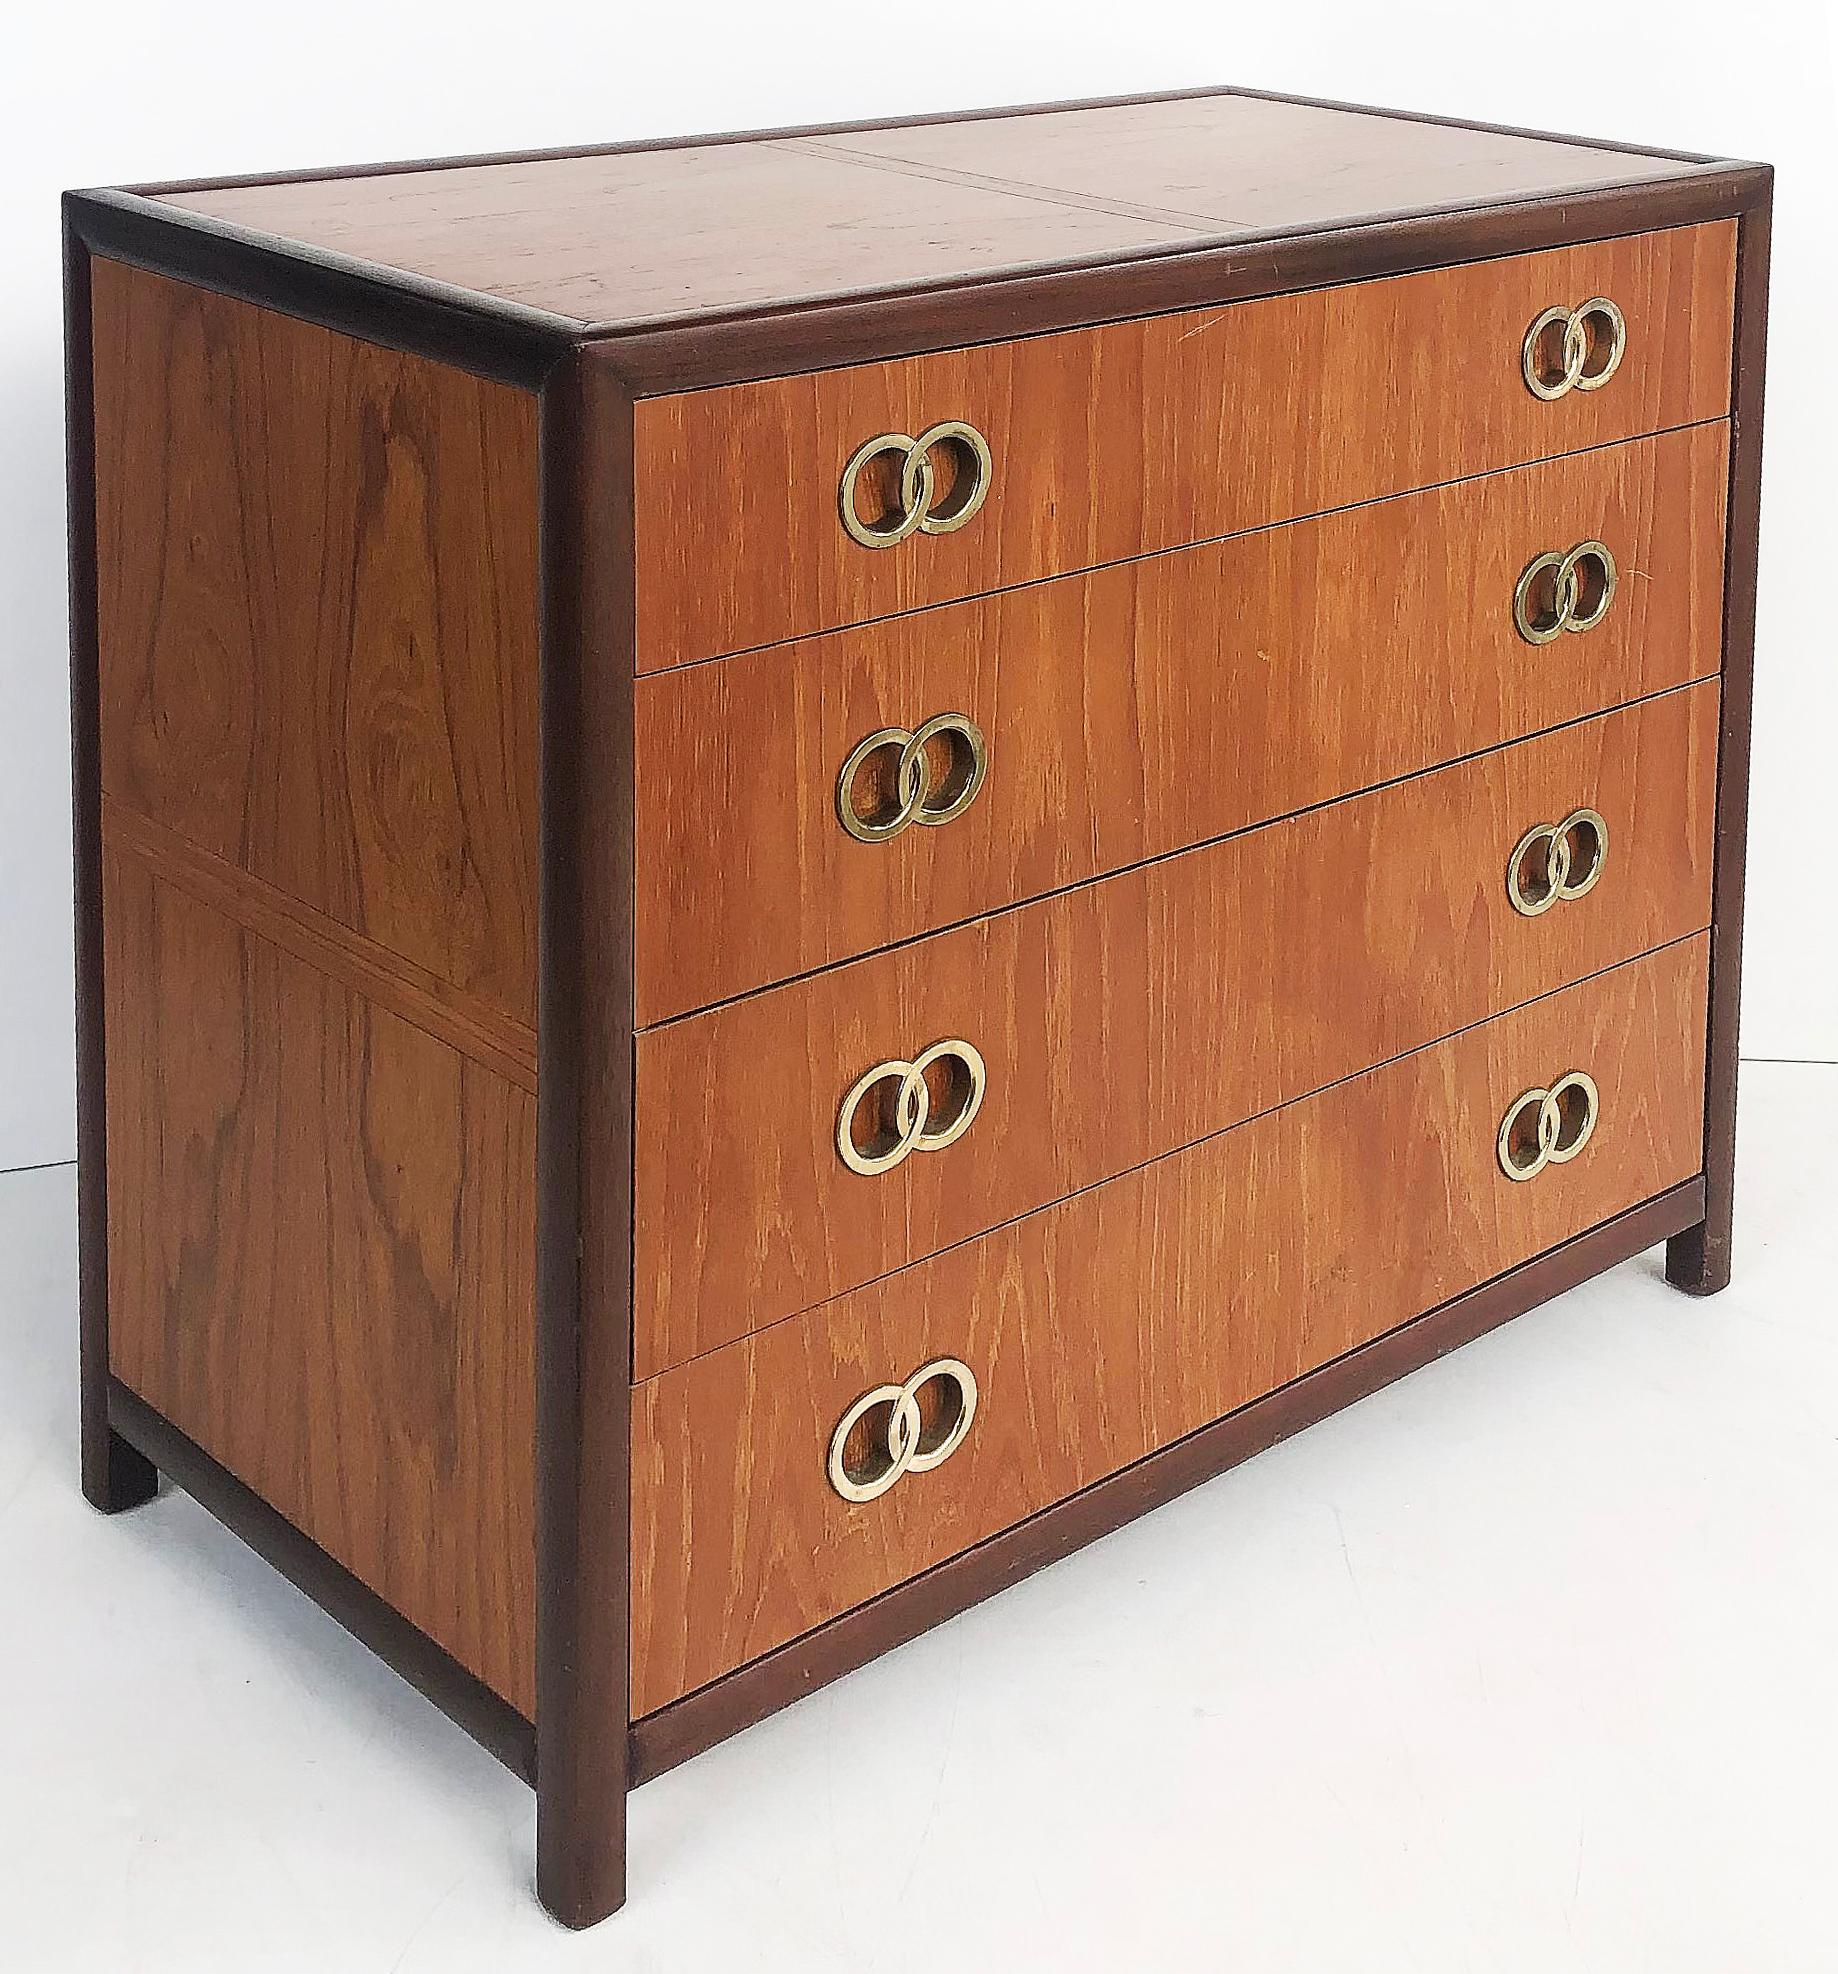 Michael Taylor baker 4 drawer chests with brass ring hardware, a pair

Offered for sale is a pair of Michael Taylor for Baker four-drawer chests with beautifully matched grained woods and brass intertwining ring pulls. The chests are finished on